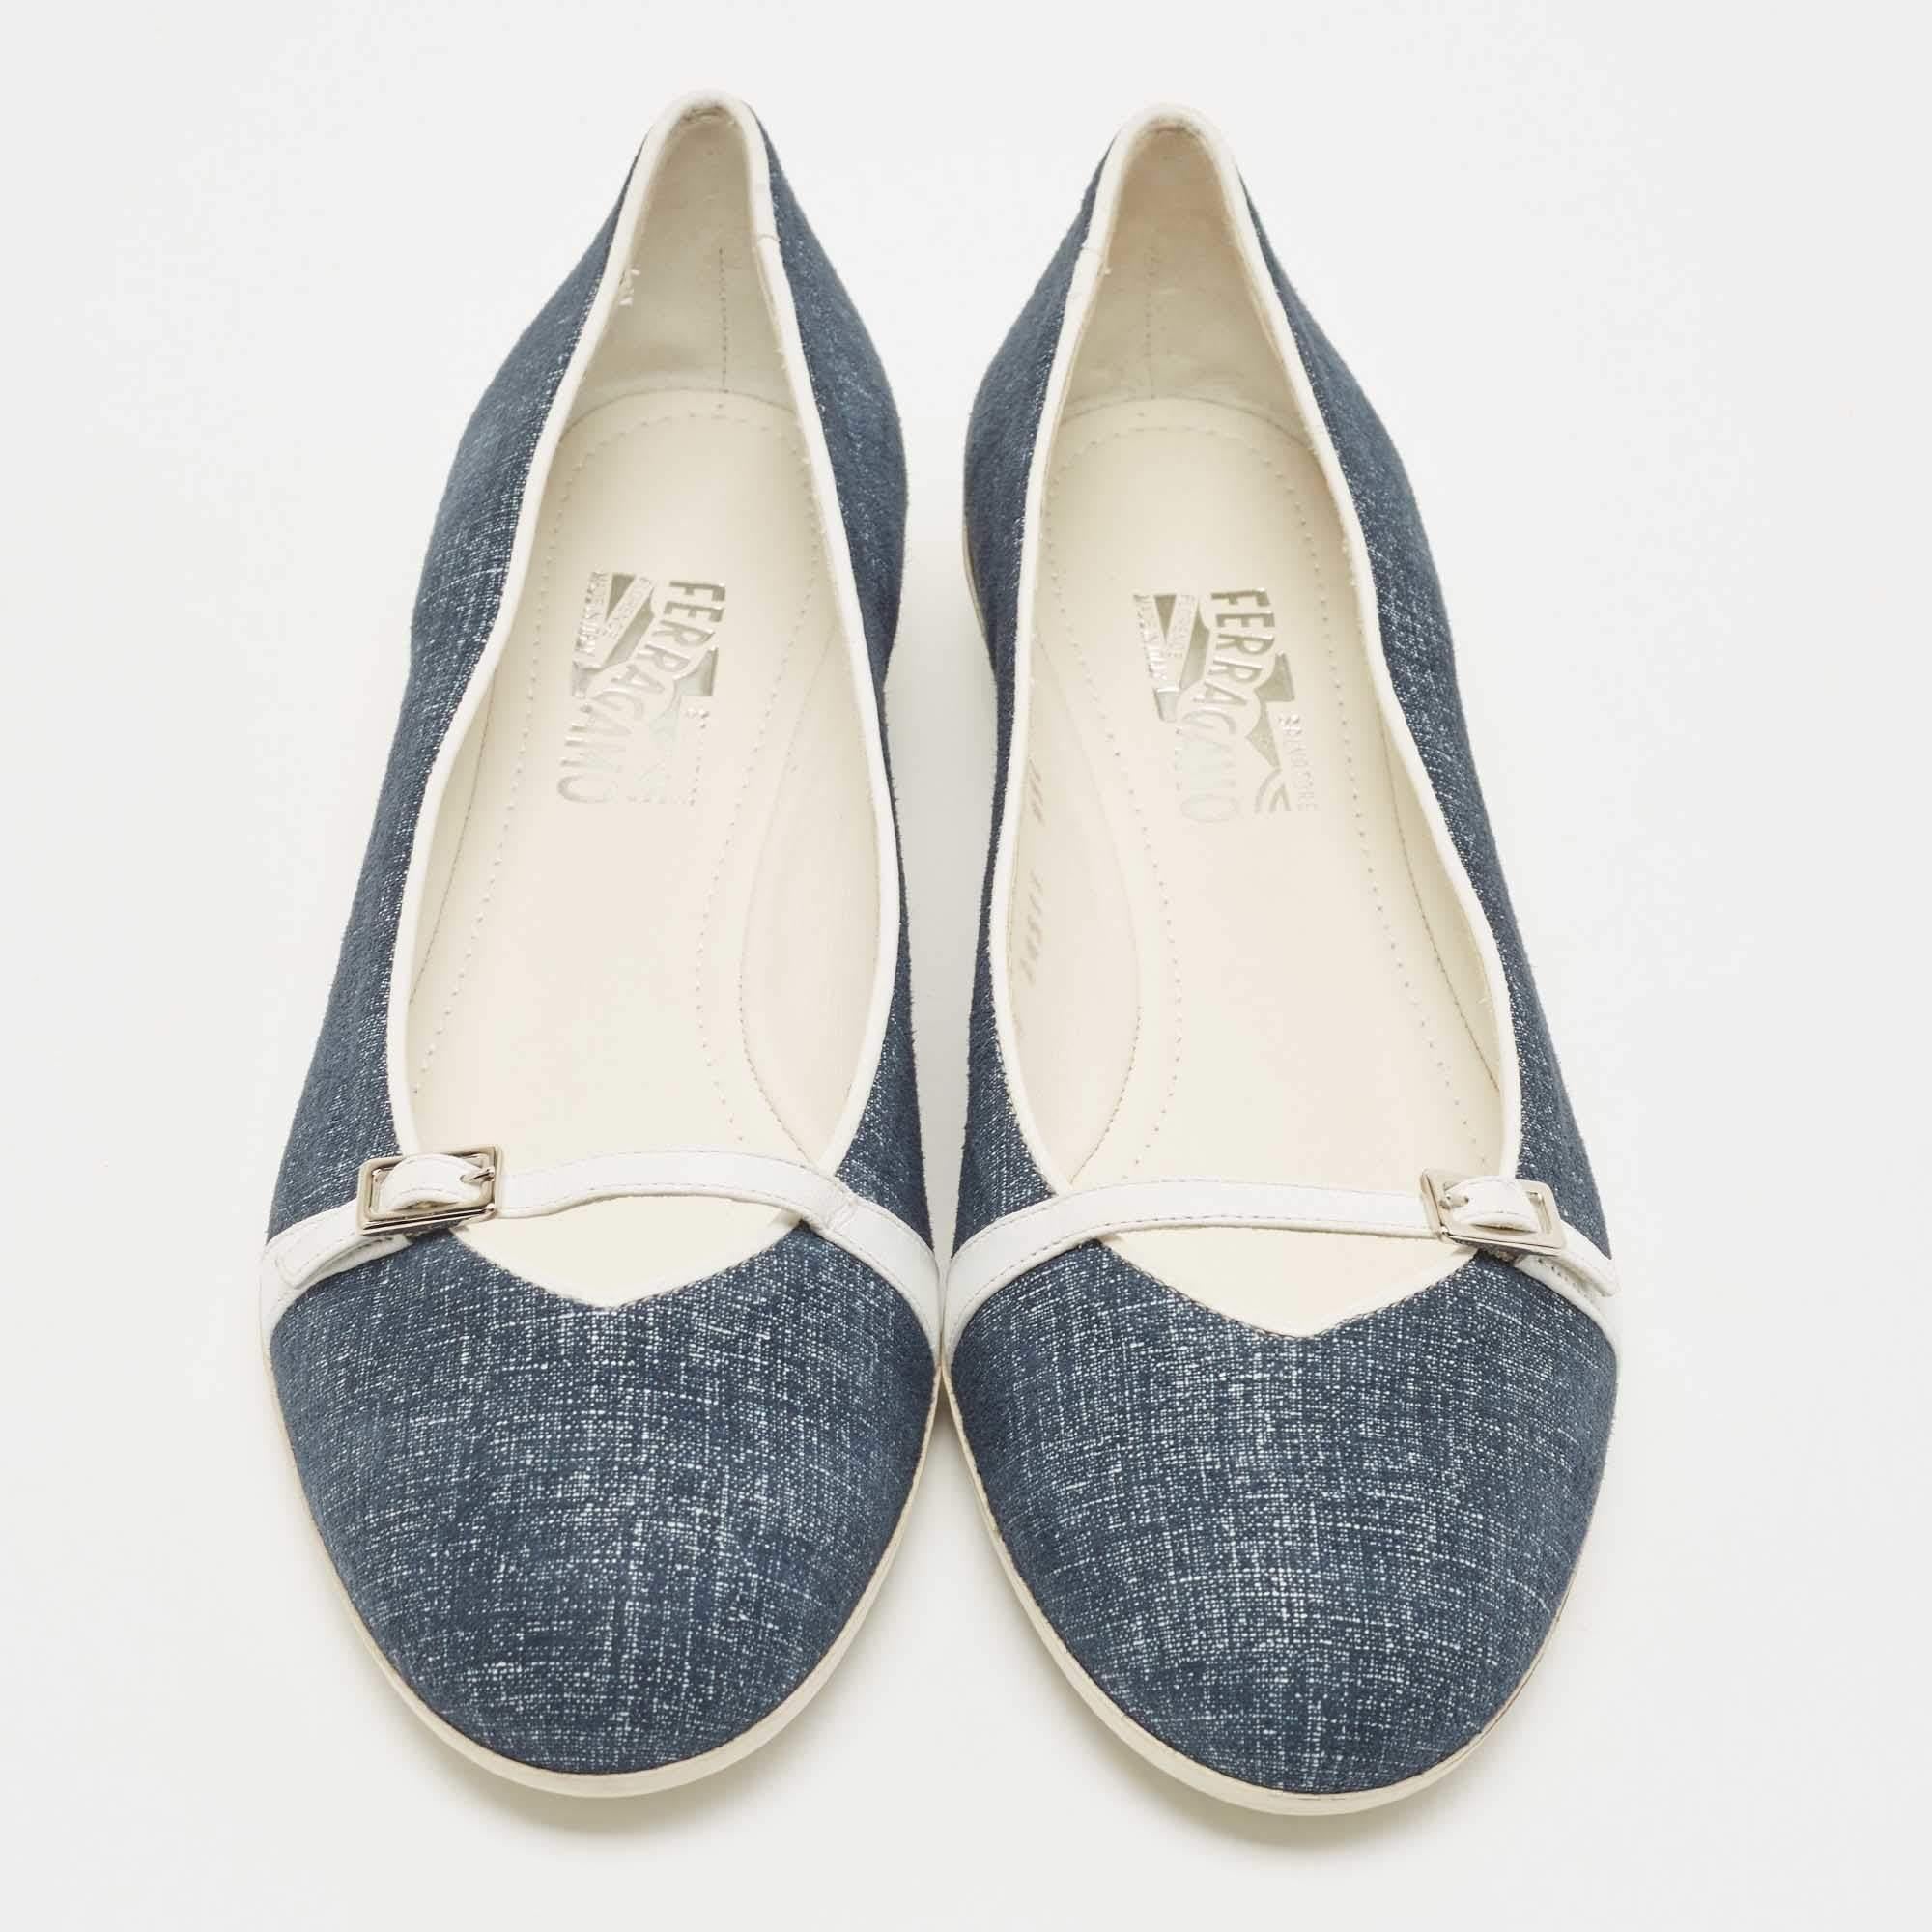 Defined by comfort and effortless style, no wardrobe is ever complete without a pair of chic ballet flats. This pair is lovely to look at and is equipped with elements like a comfortable insole and a durable sole.

Includes: Original Dustbag,